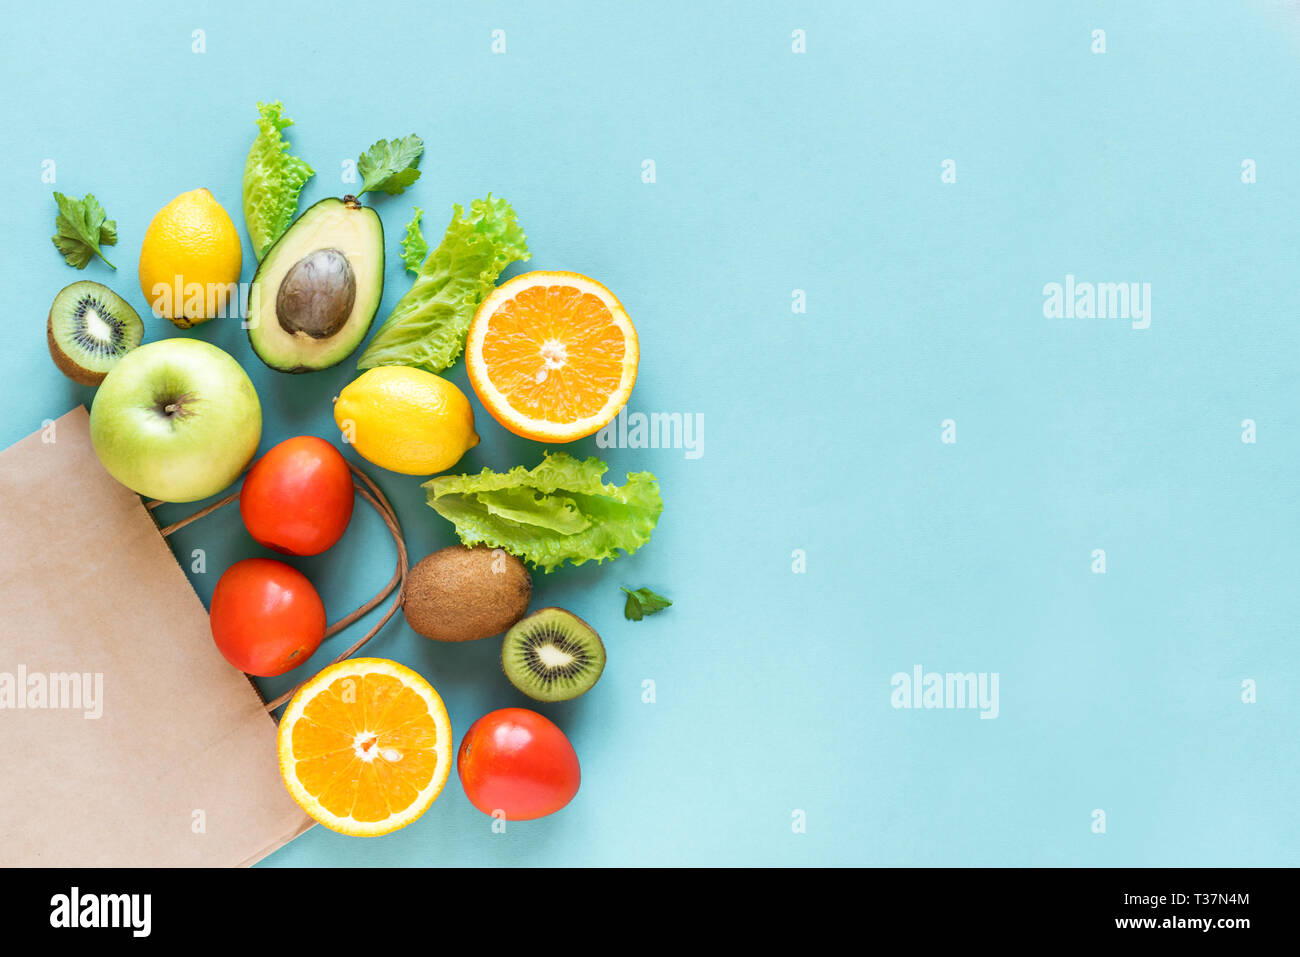 Healthy food background. Healthy food in paper bag vegetables and fruits on blue, copy space. Shopping food supermarket concept. Stock Photo